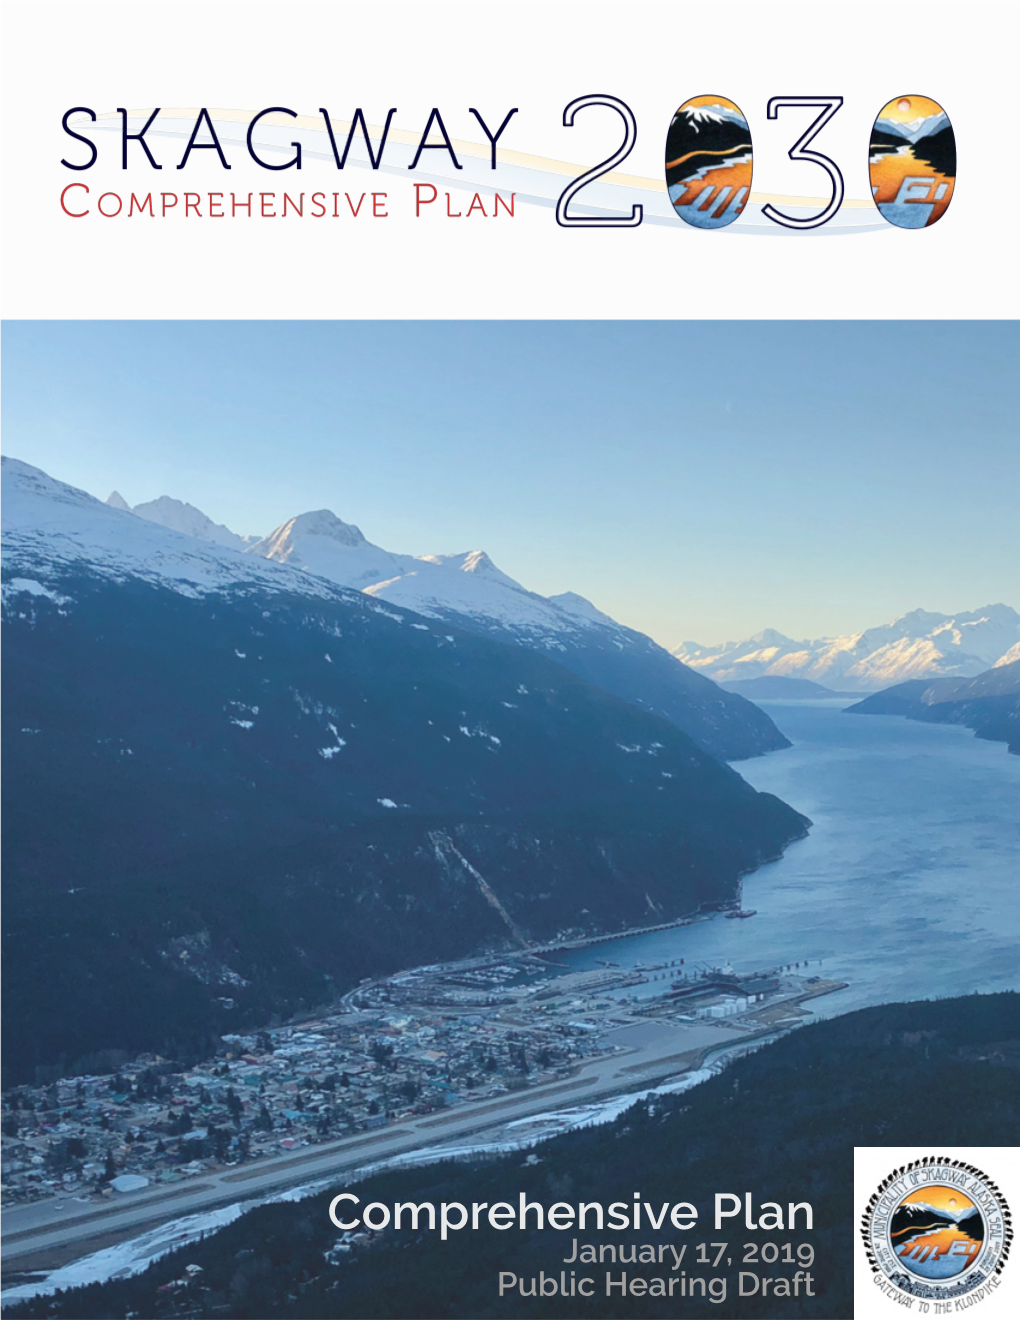 Skagway 2030 Comprehensive Plan Consulting Team